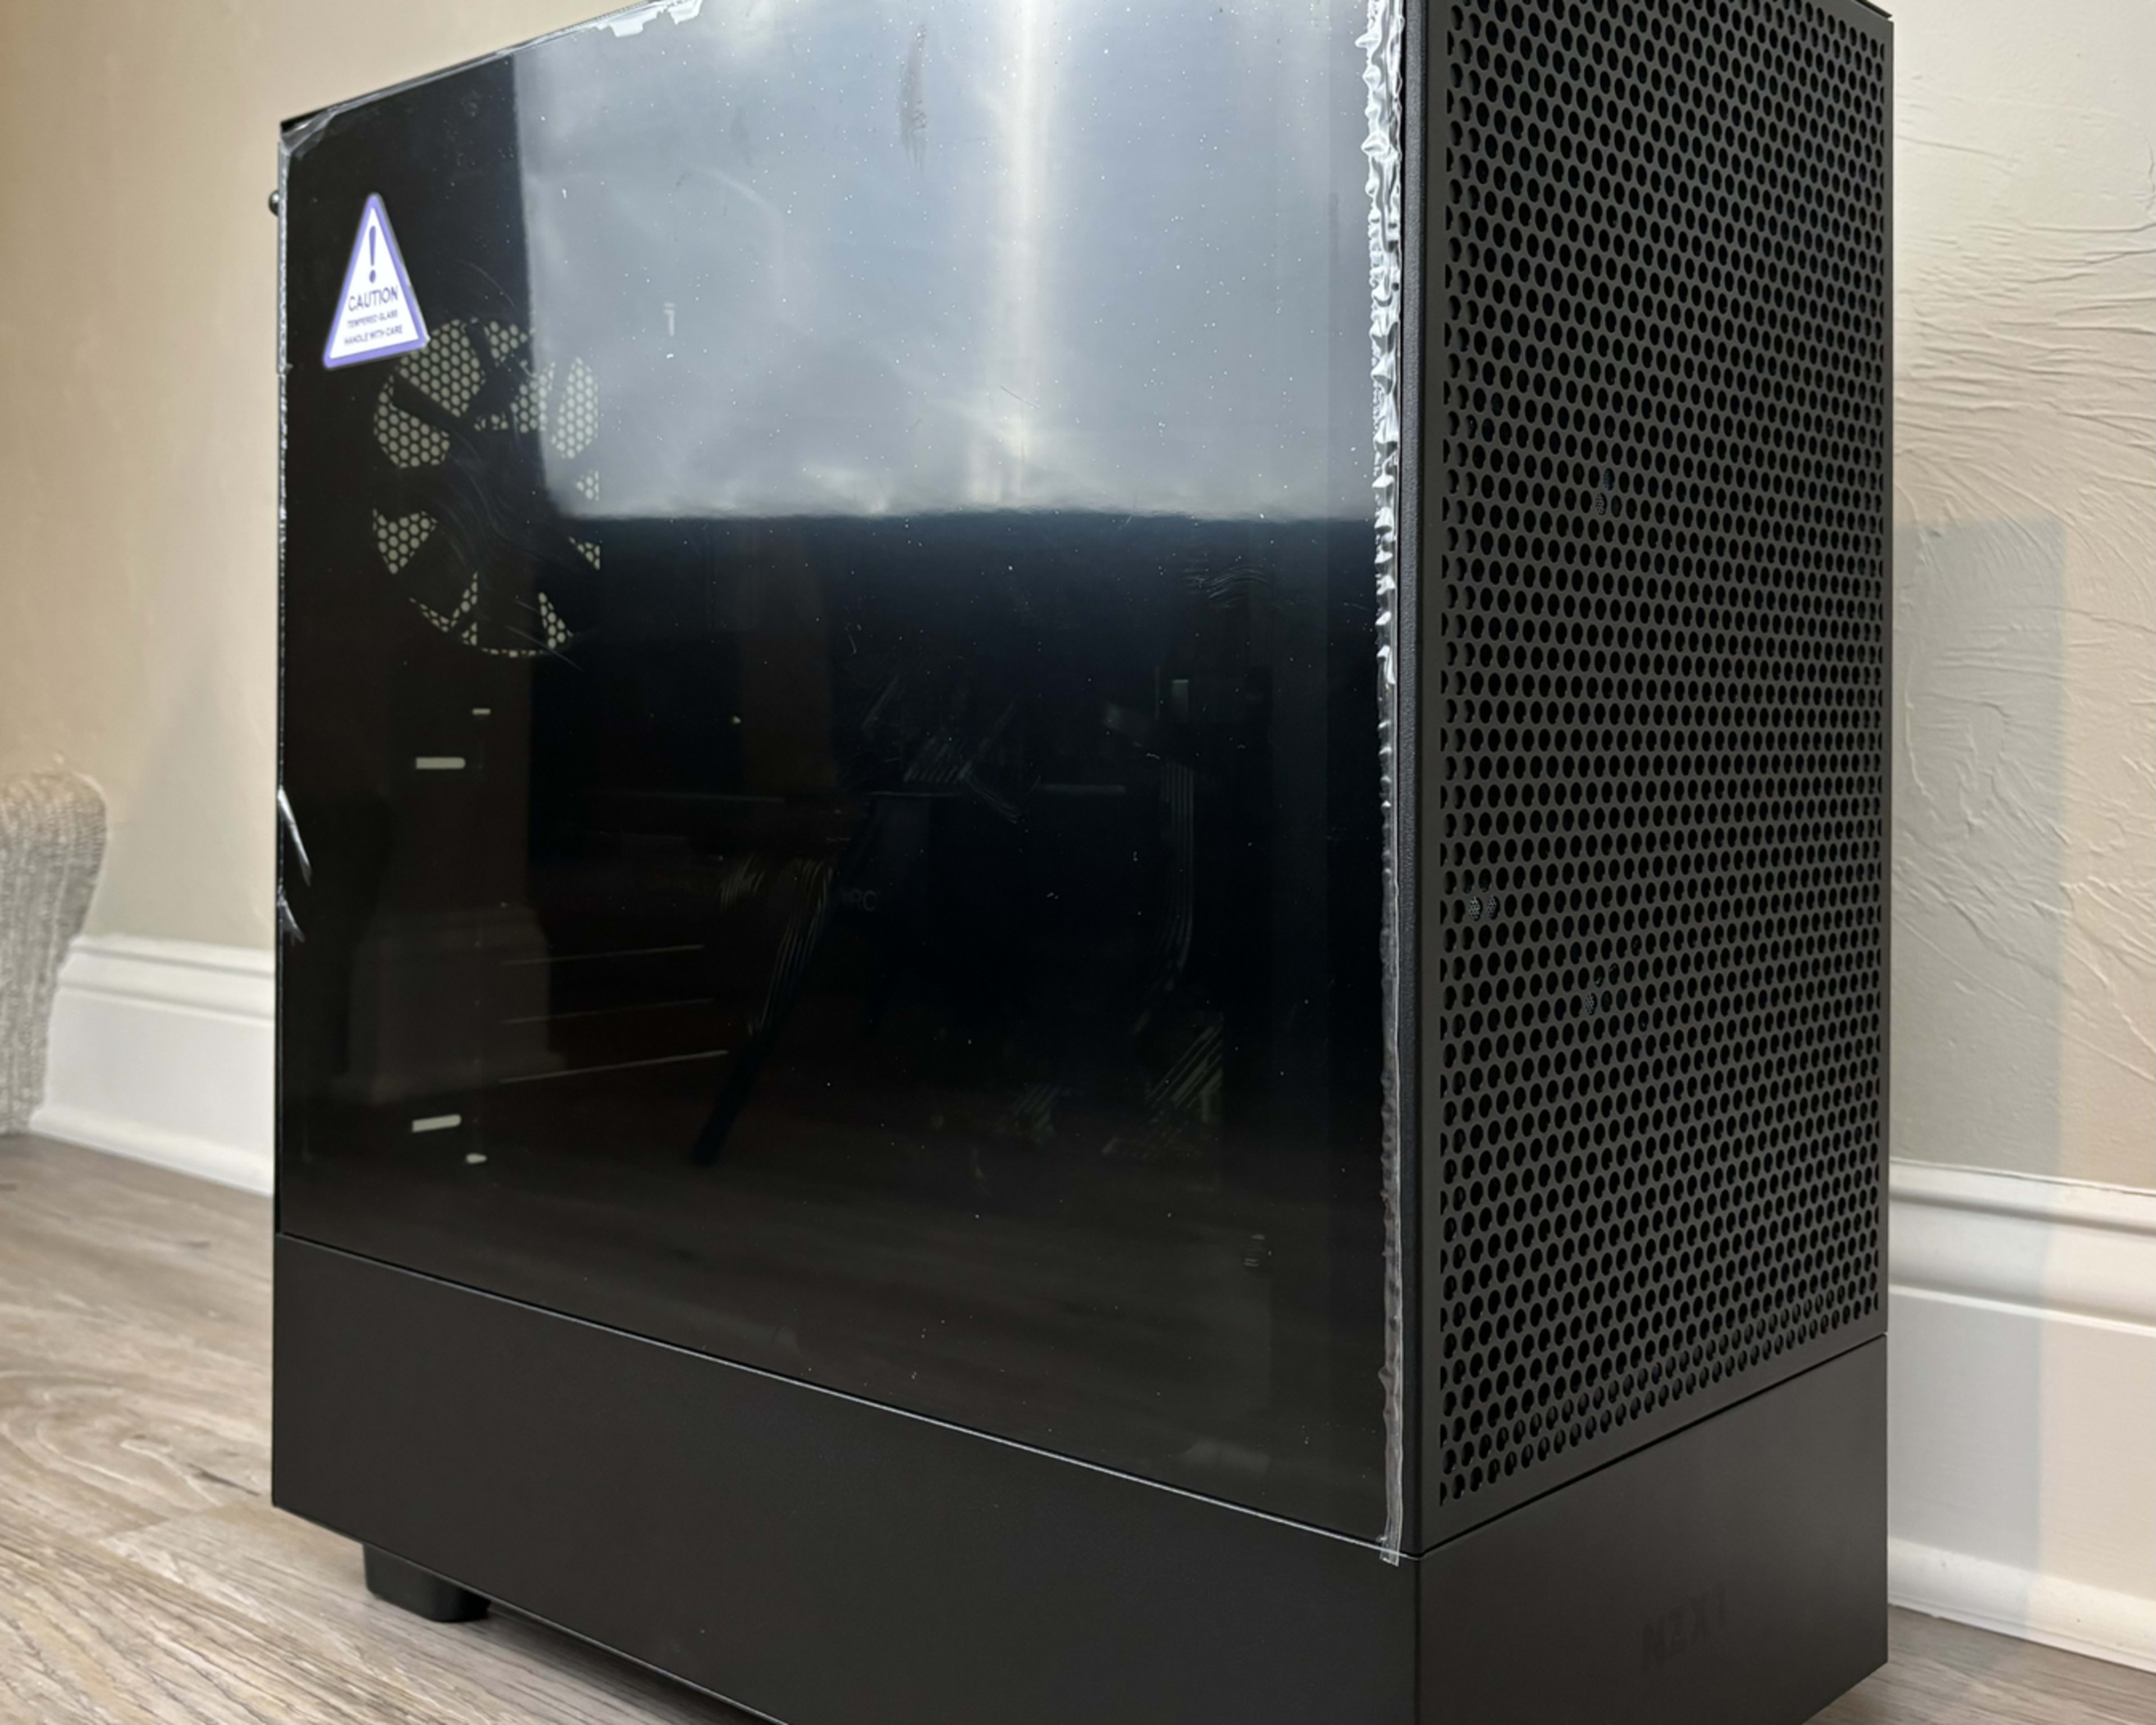 Mid Range Stealthy Intel Gaming PC *BENCHMARKS IN DESCRIPTION*